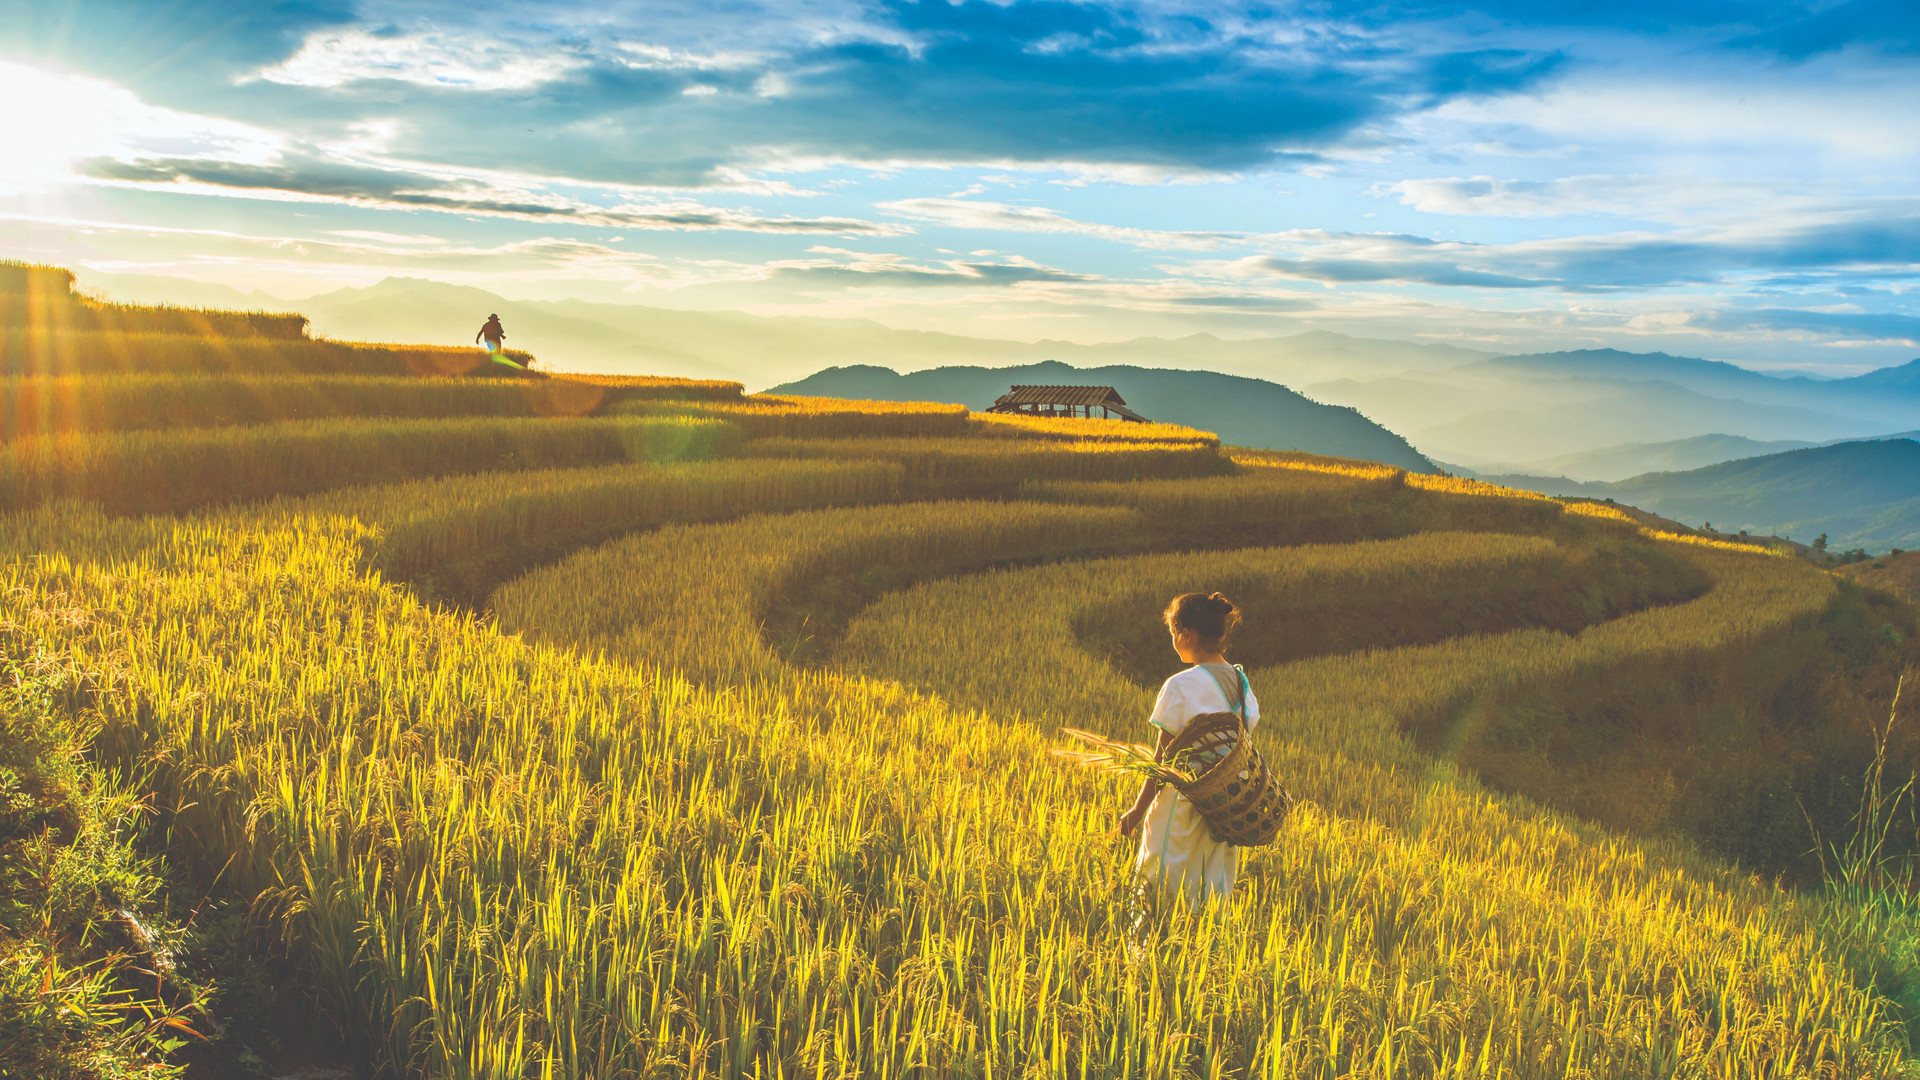 golden-rice-fields-countryside-chiang-mai-thailand-compressed.jpg